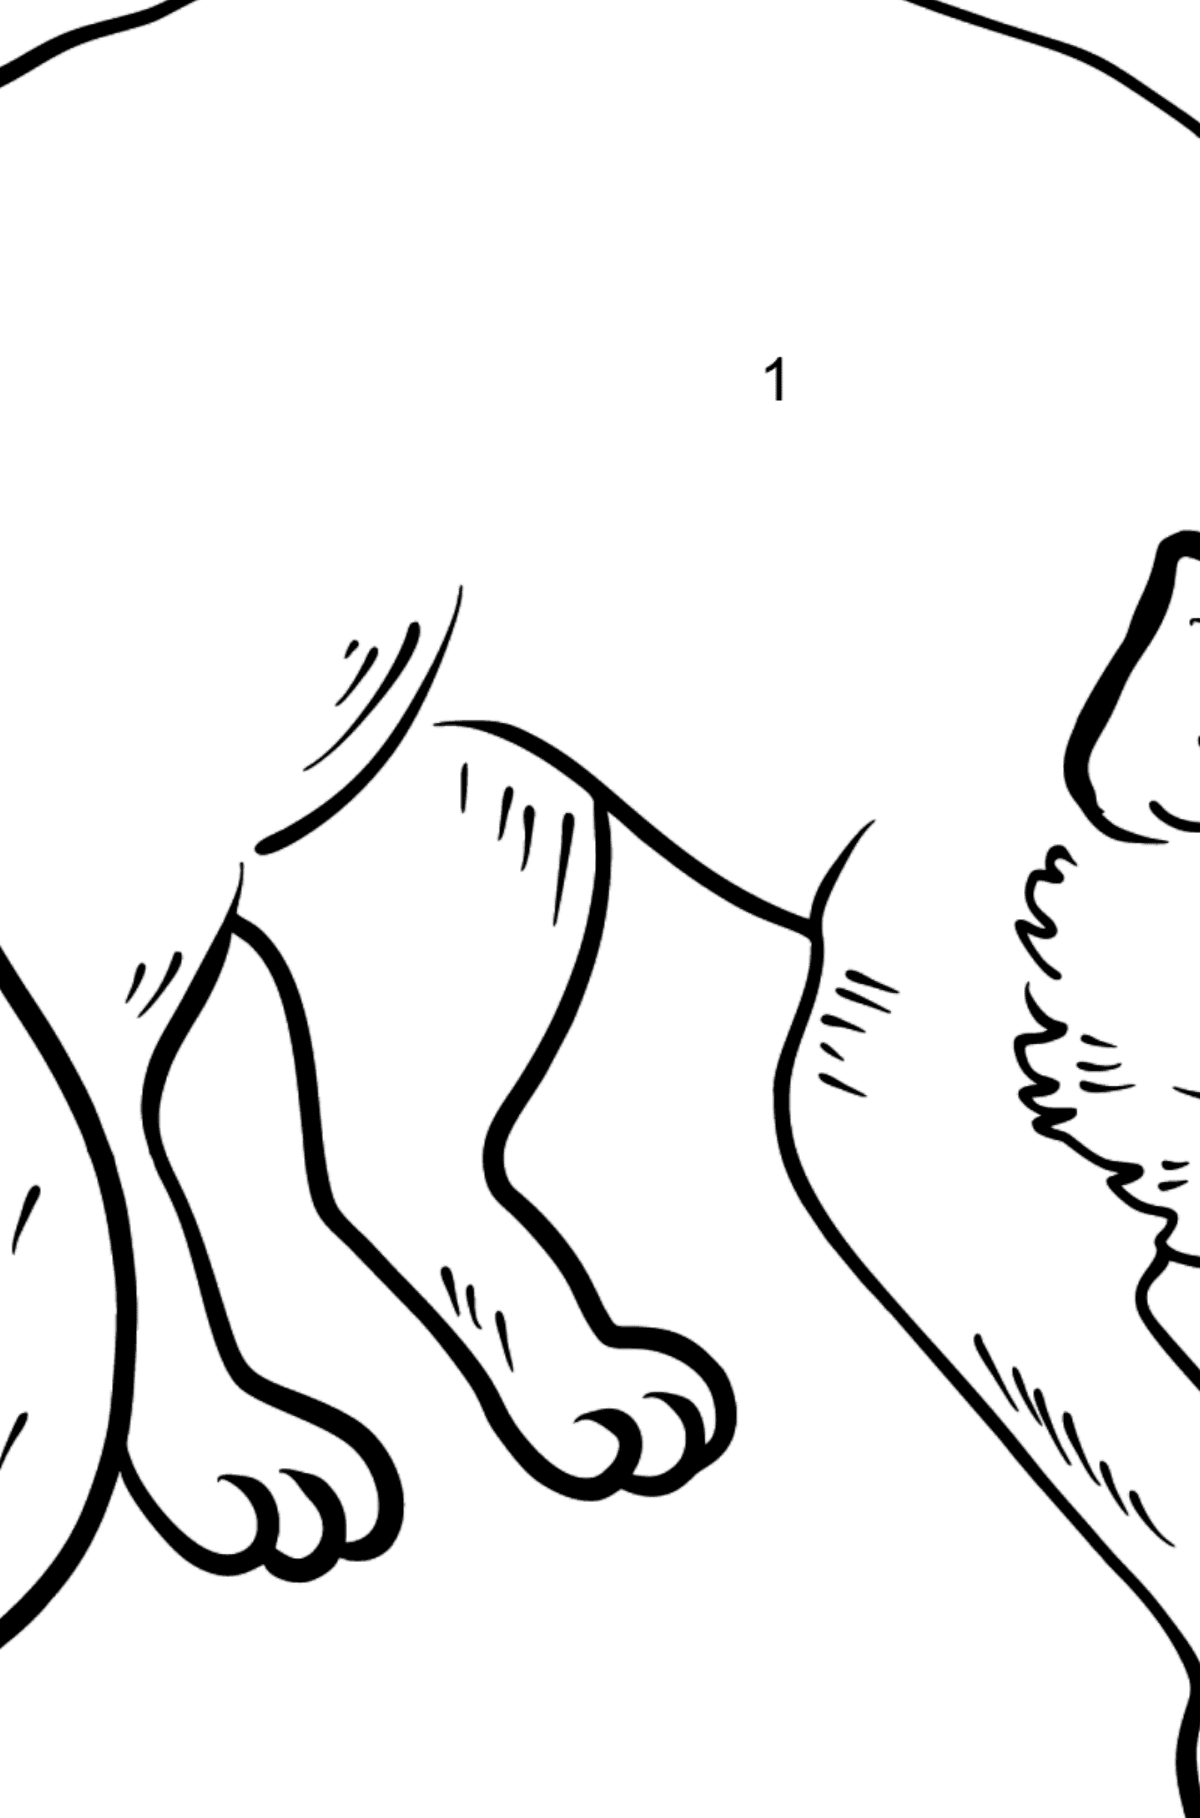 Fox coloring page - Coloring by Numbers for Kids